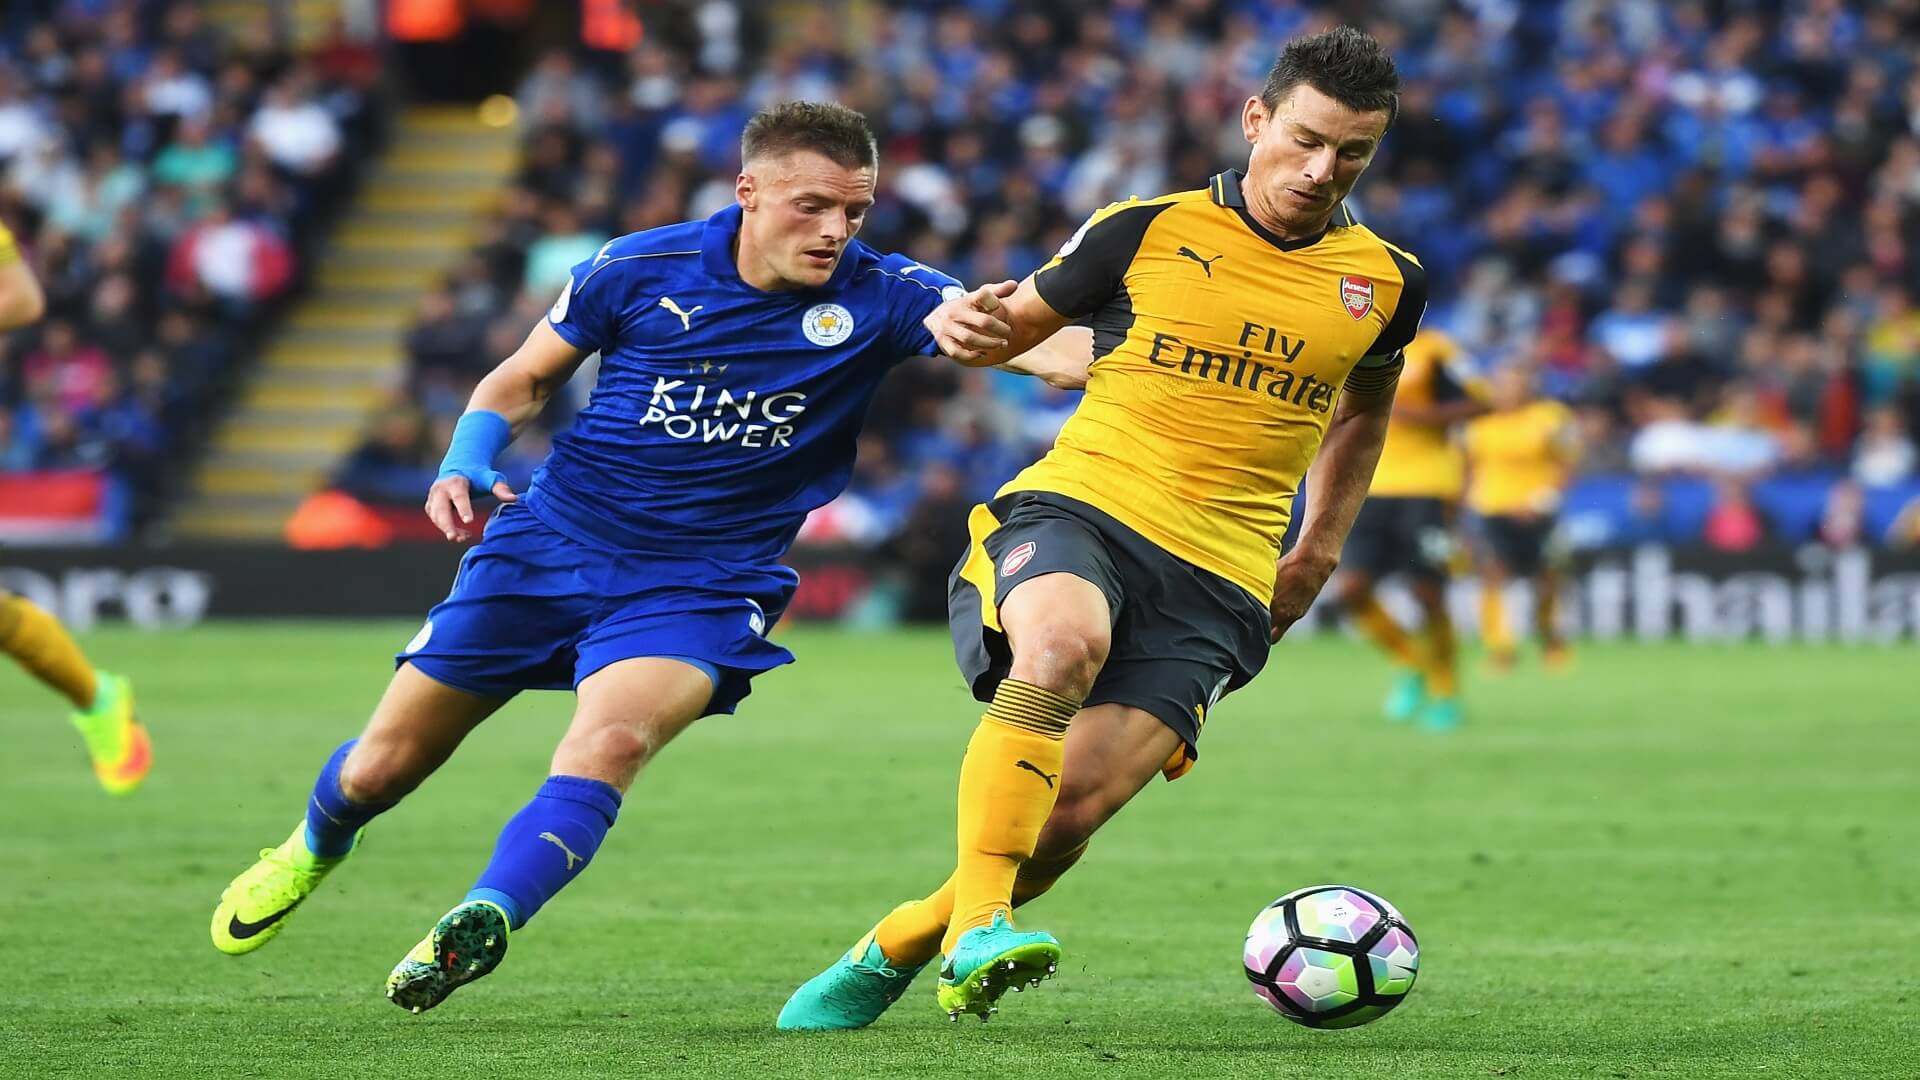 Match Review : LCFC vs Arsenal